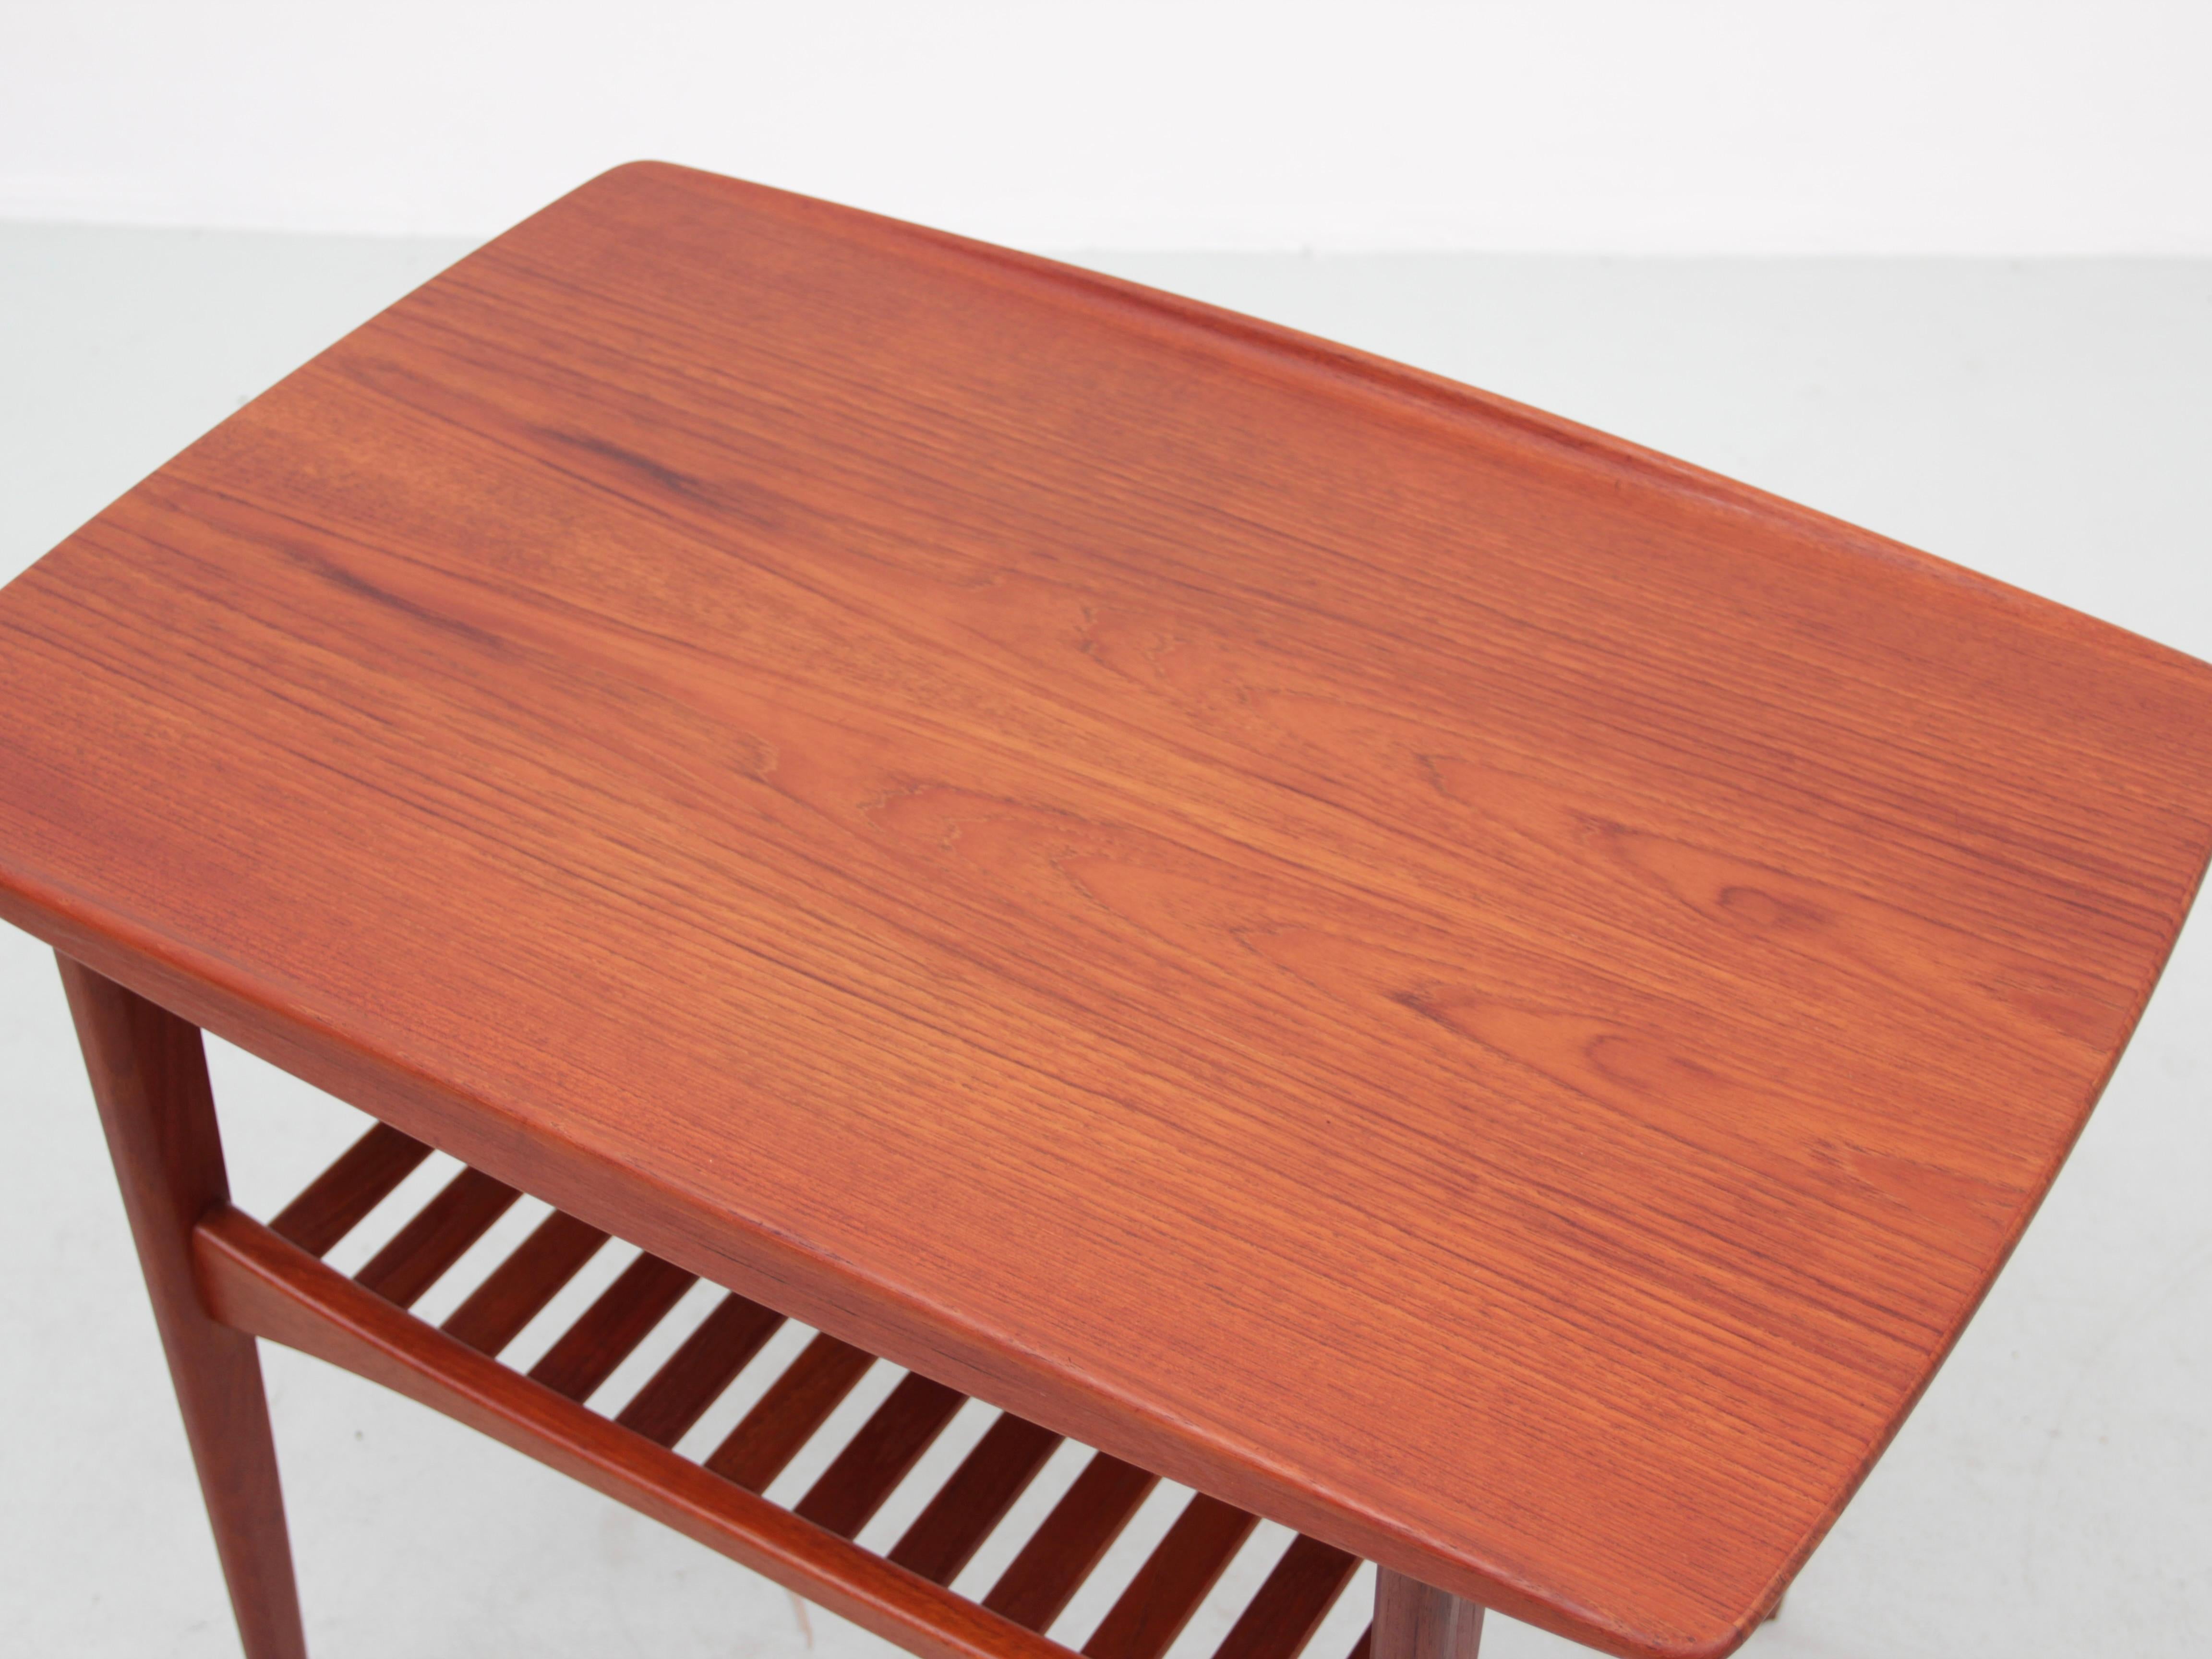 Mid-20th Century Mid-Century Modern Side Table in Teak by Tove and Edvard Kindt-Larsen